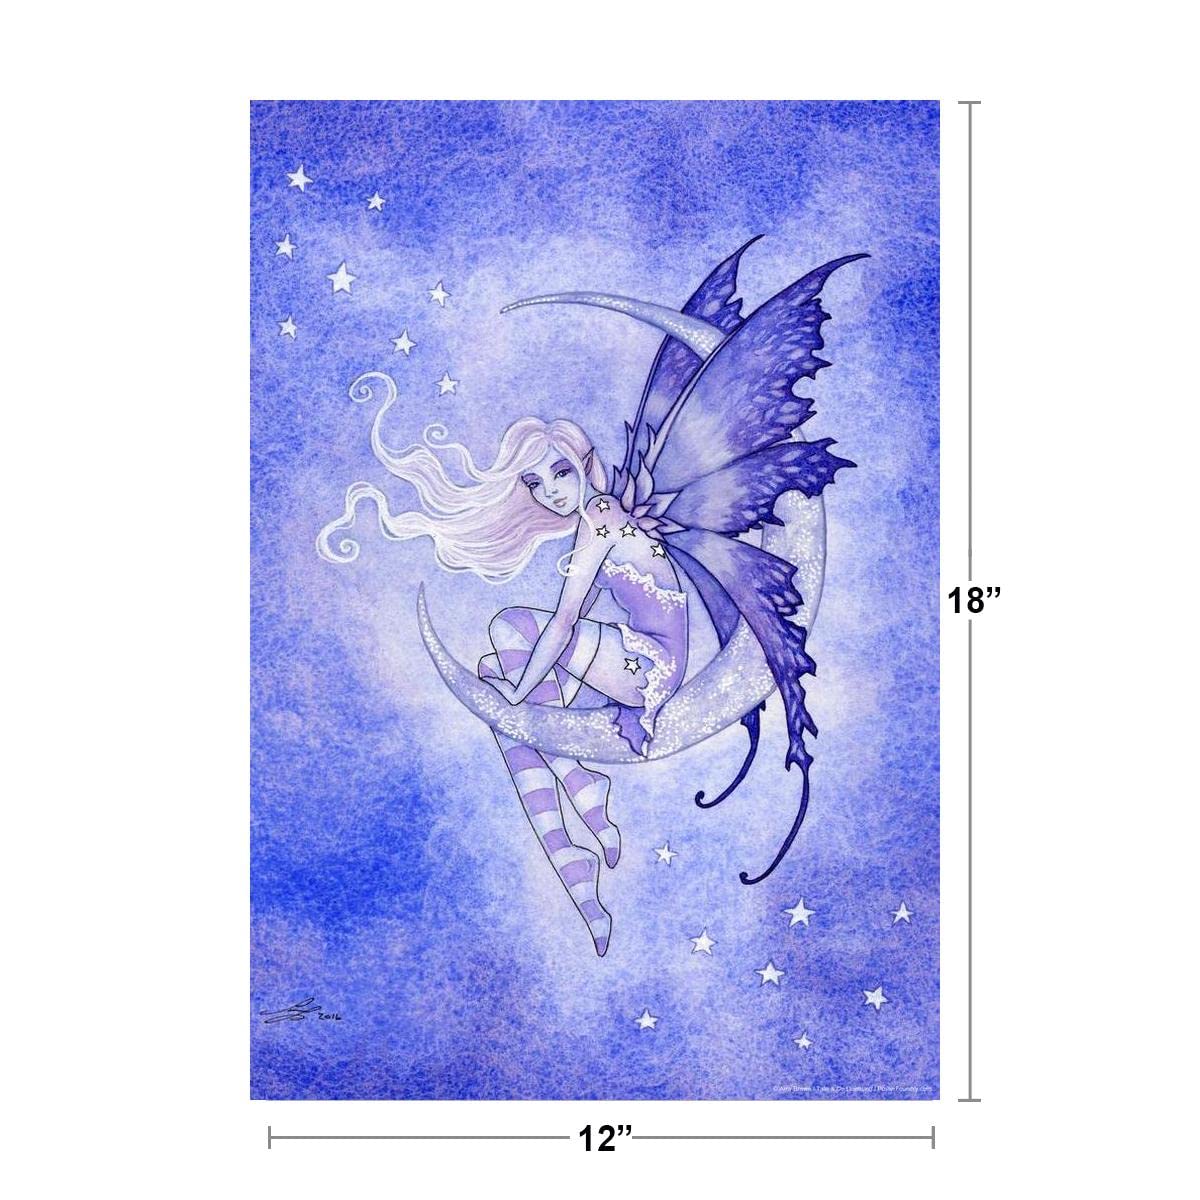 Moon Fae by Amy Brown Cool Wall Decor Art Print Poster 12x18